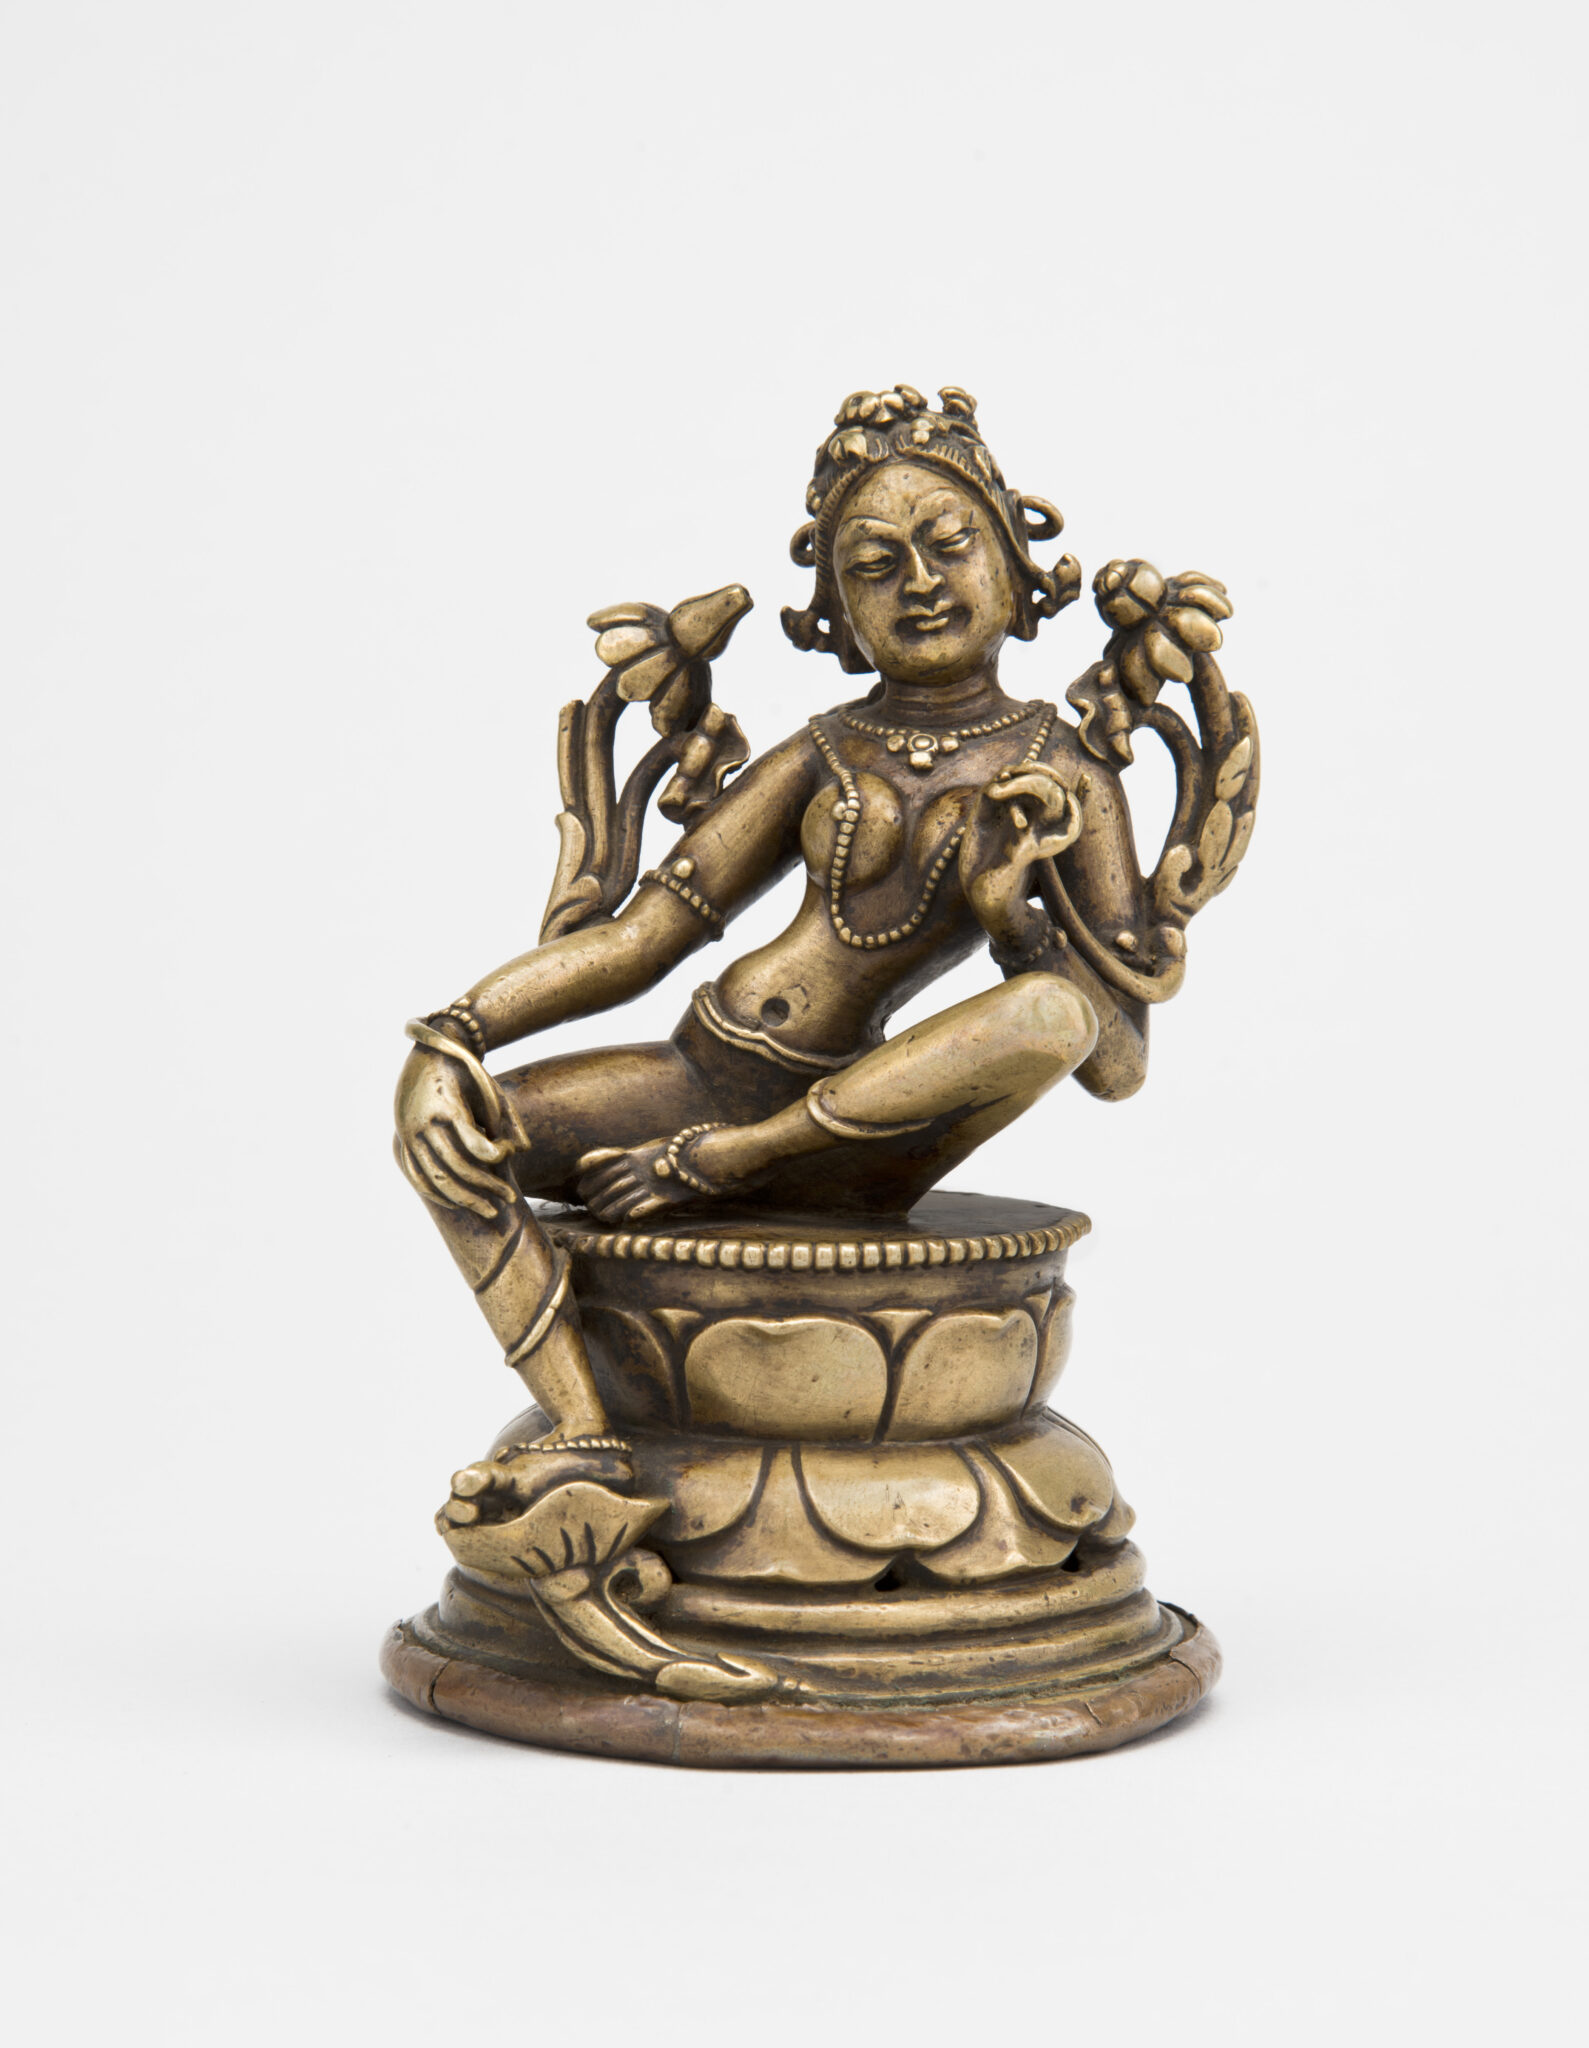 Bronze-colored sculpture depicting Bodhisattva seated on lotus pedestal, torso inclined to the right, holding blossoms